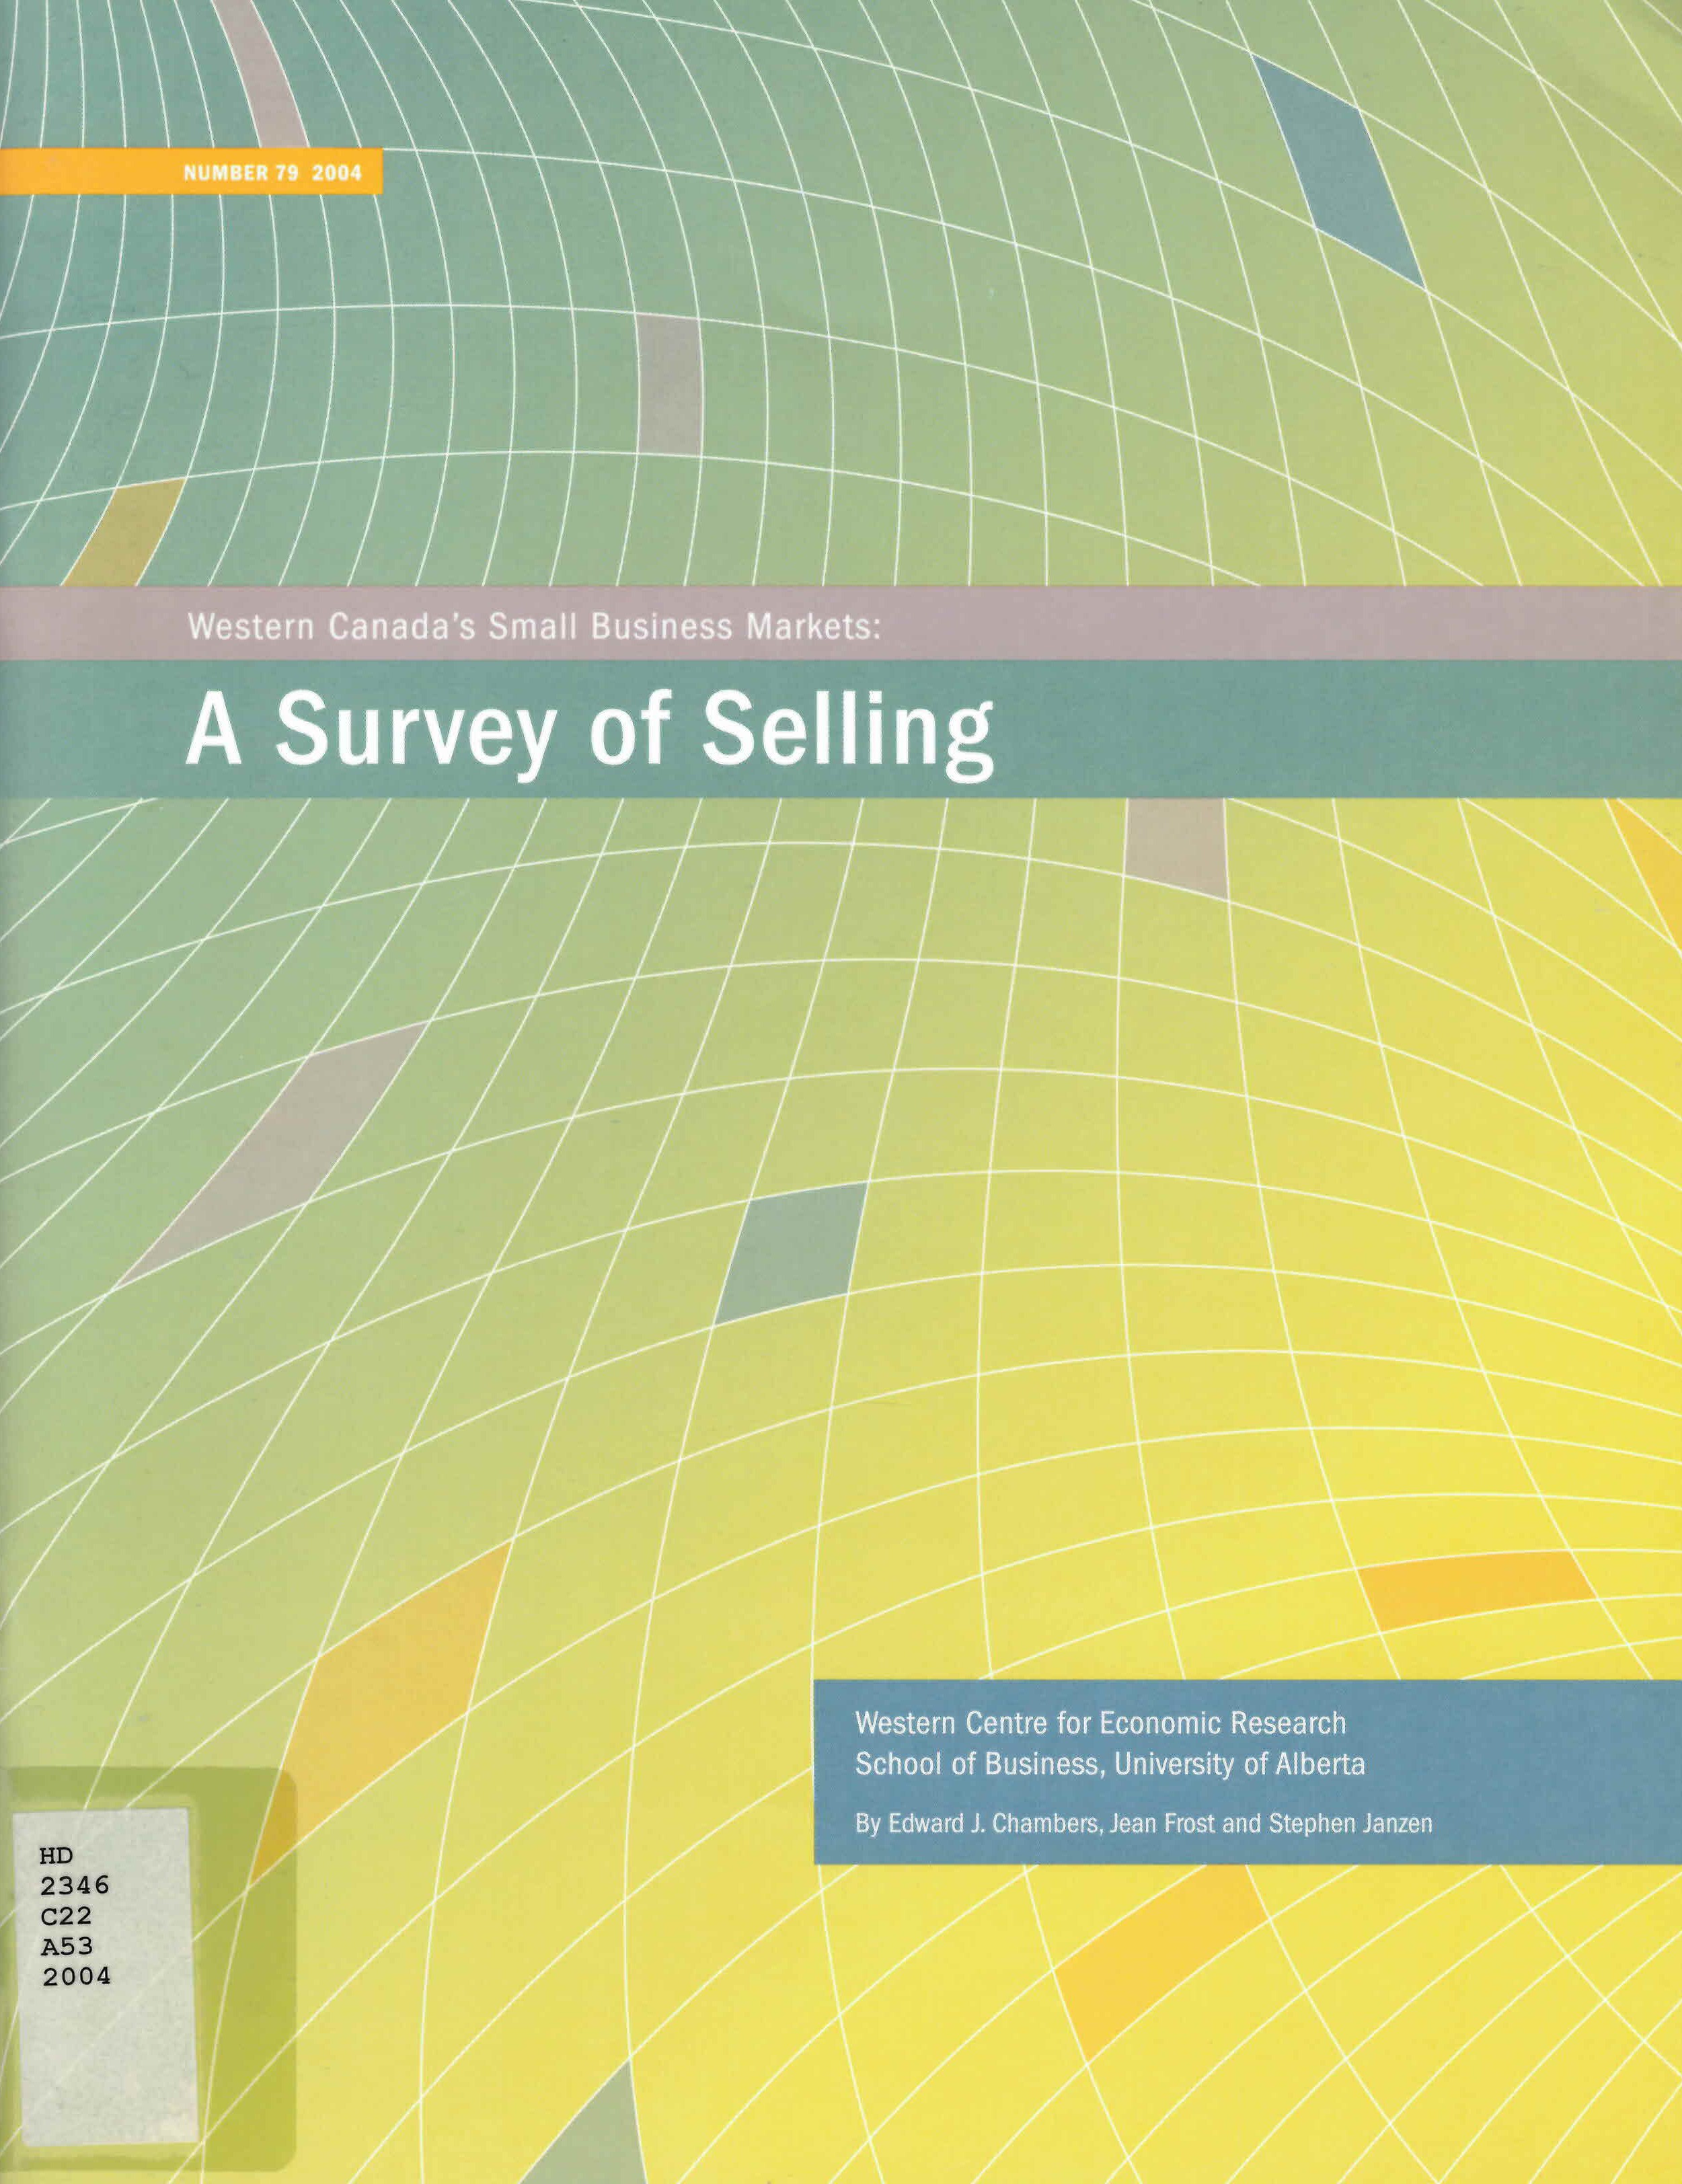 Western Canada's small business markets : a survey of selling